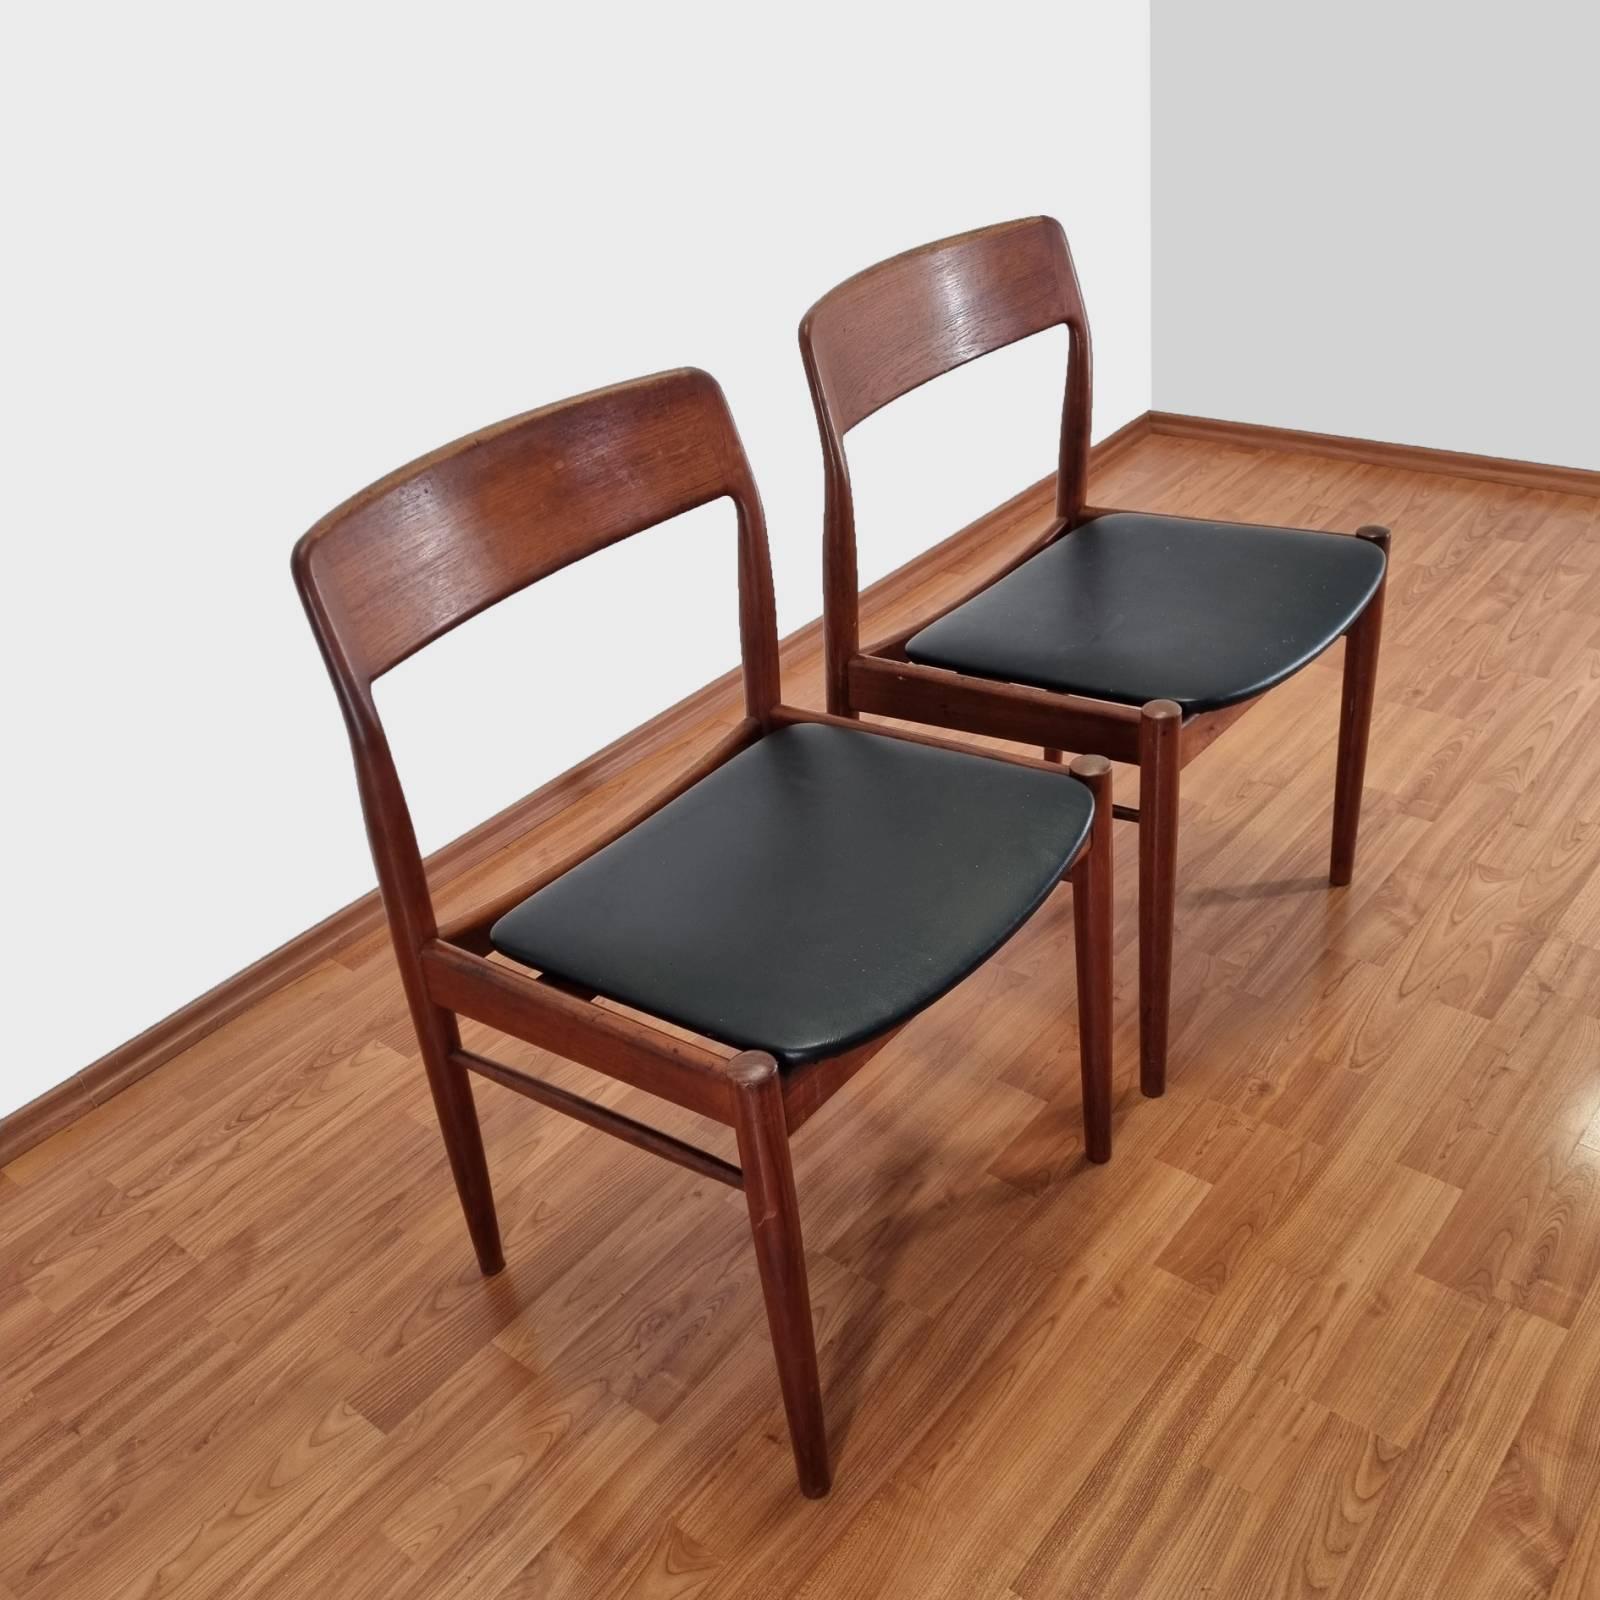 Pair of teak dining chairs designed by Niels Otto Möller, made in Denmark in the 60s.
In very good vintage condition with minor traces of use and age.
